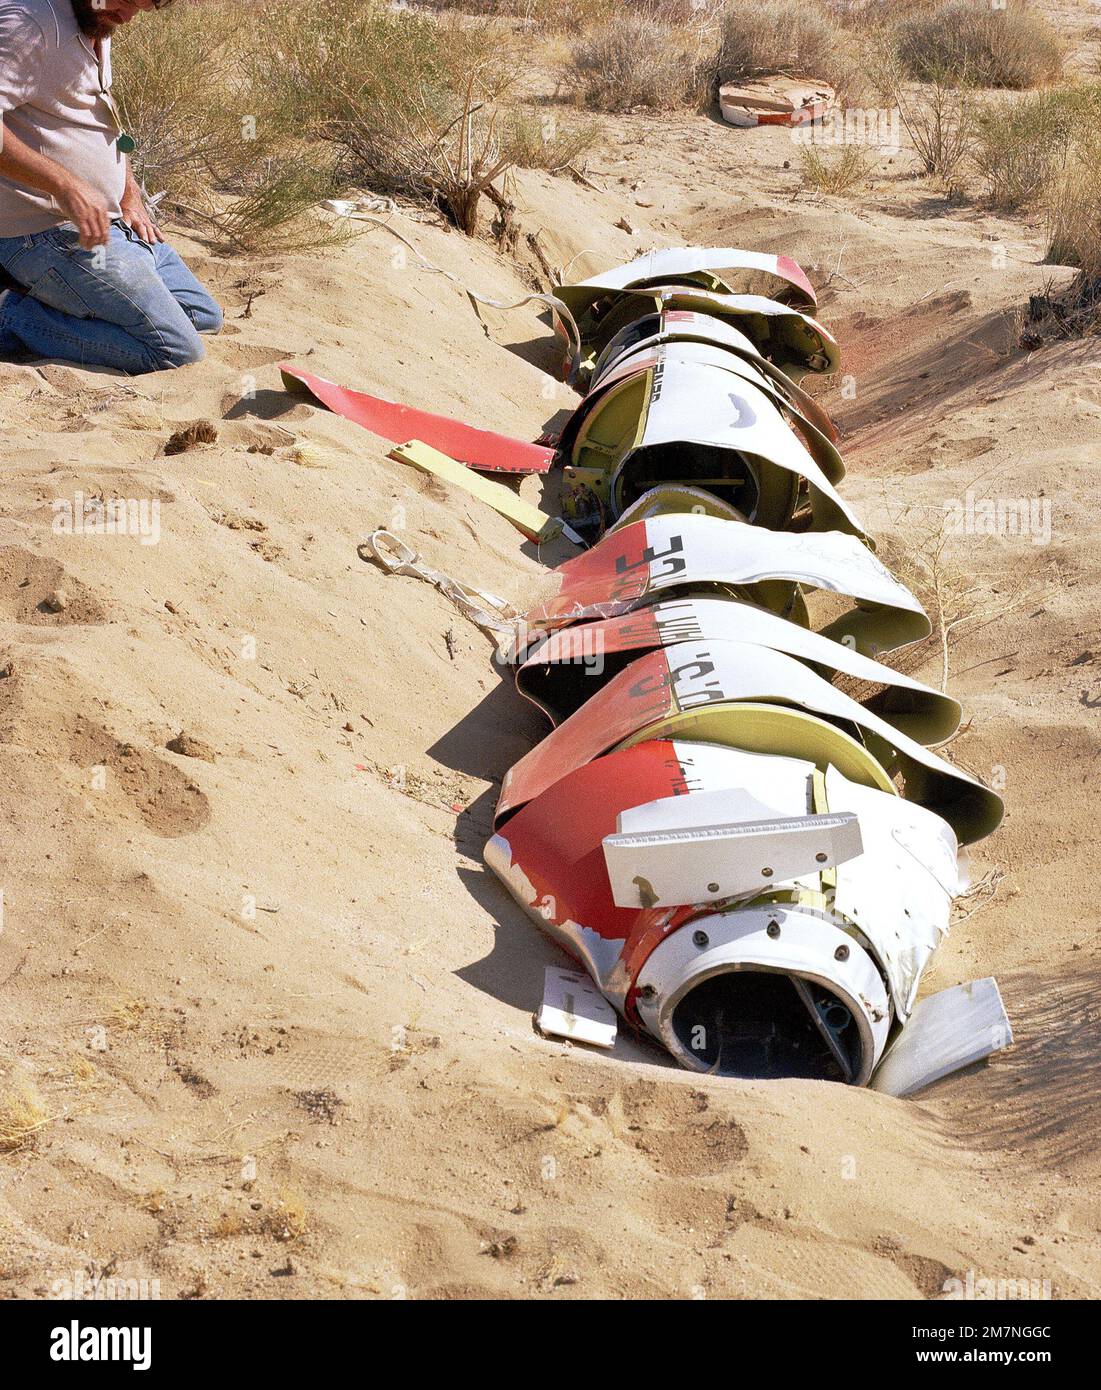 A close-up view of a damaged AGM-109 Tomahawk air-launched cruise missile on the ground after impact. Country: Unknown Stock Photo